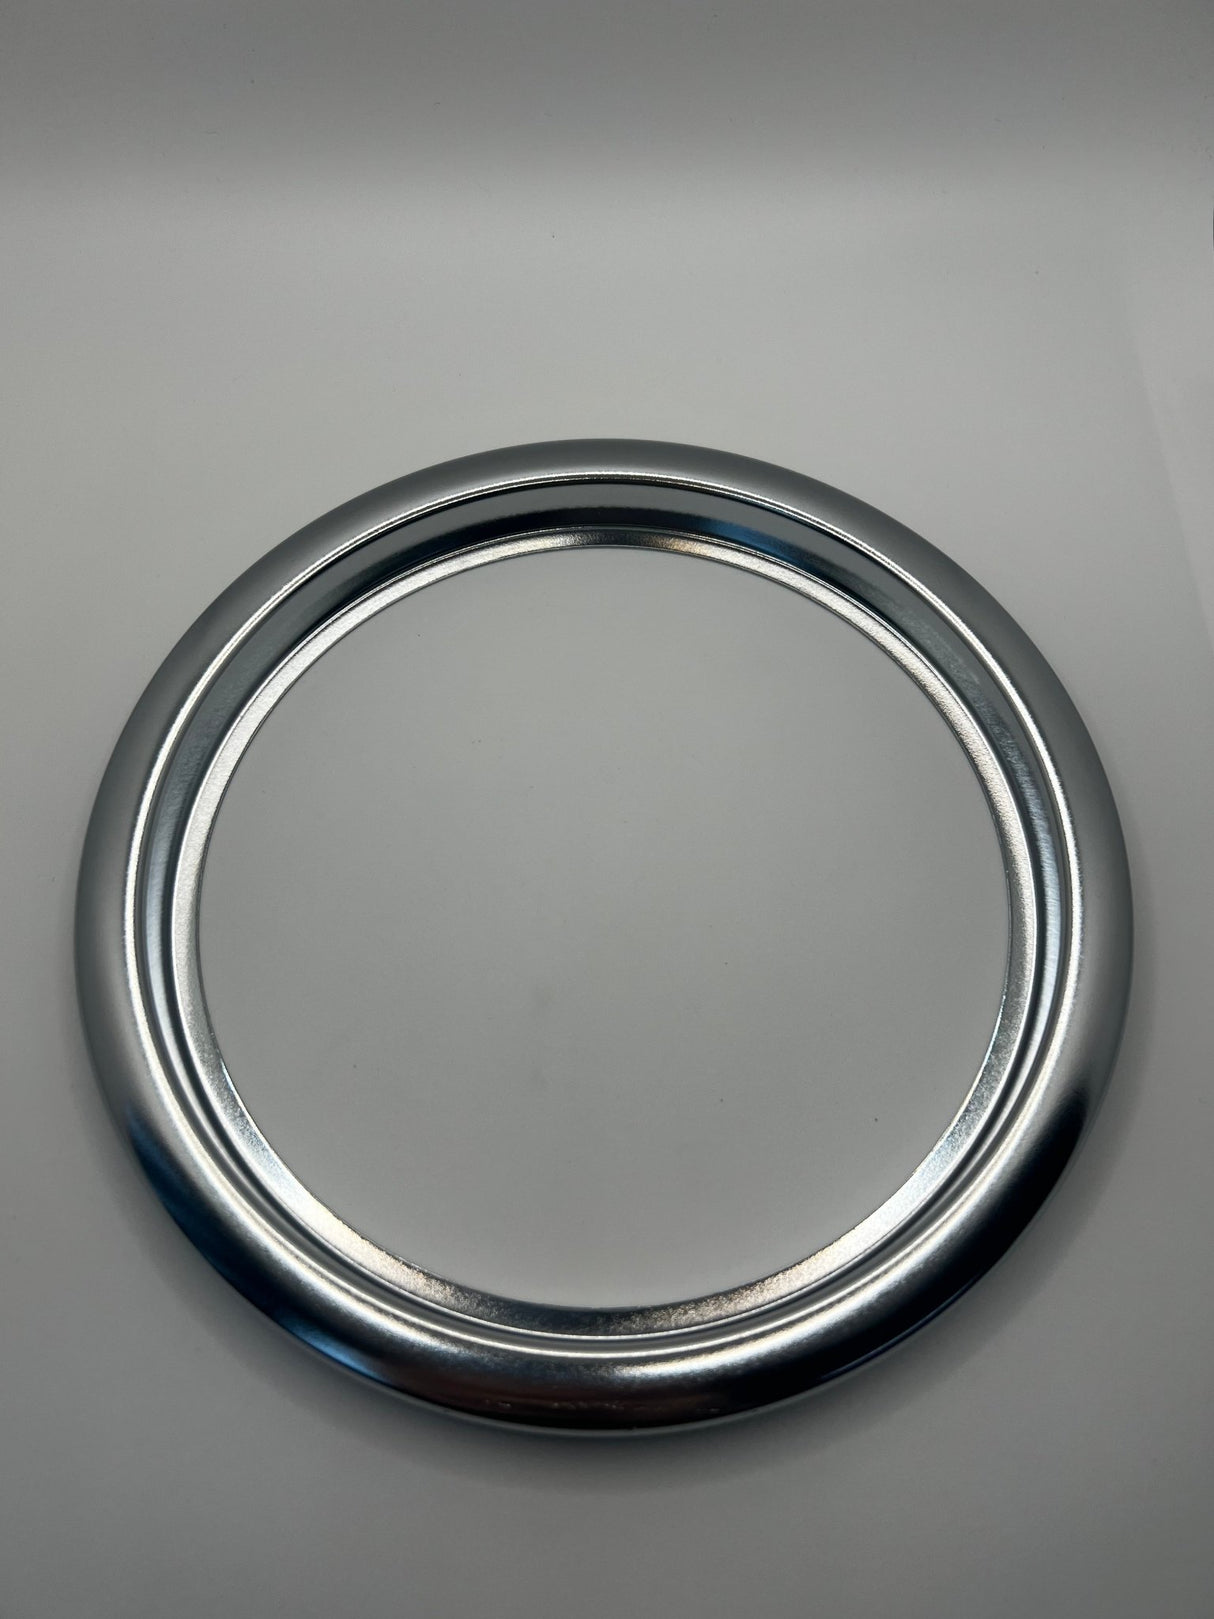 CHEF/WESTINGHOUSE TRIM RINGS 3 x 6" (2799) & 1 x 8" (2800) - My Oven Spares-Chef-2799x3 2800x1-3